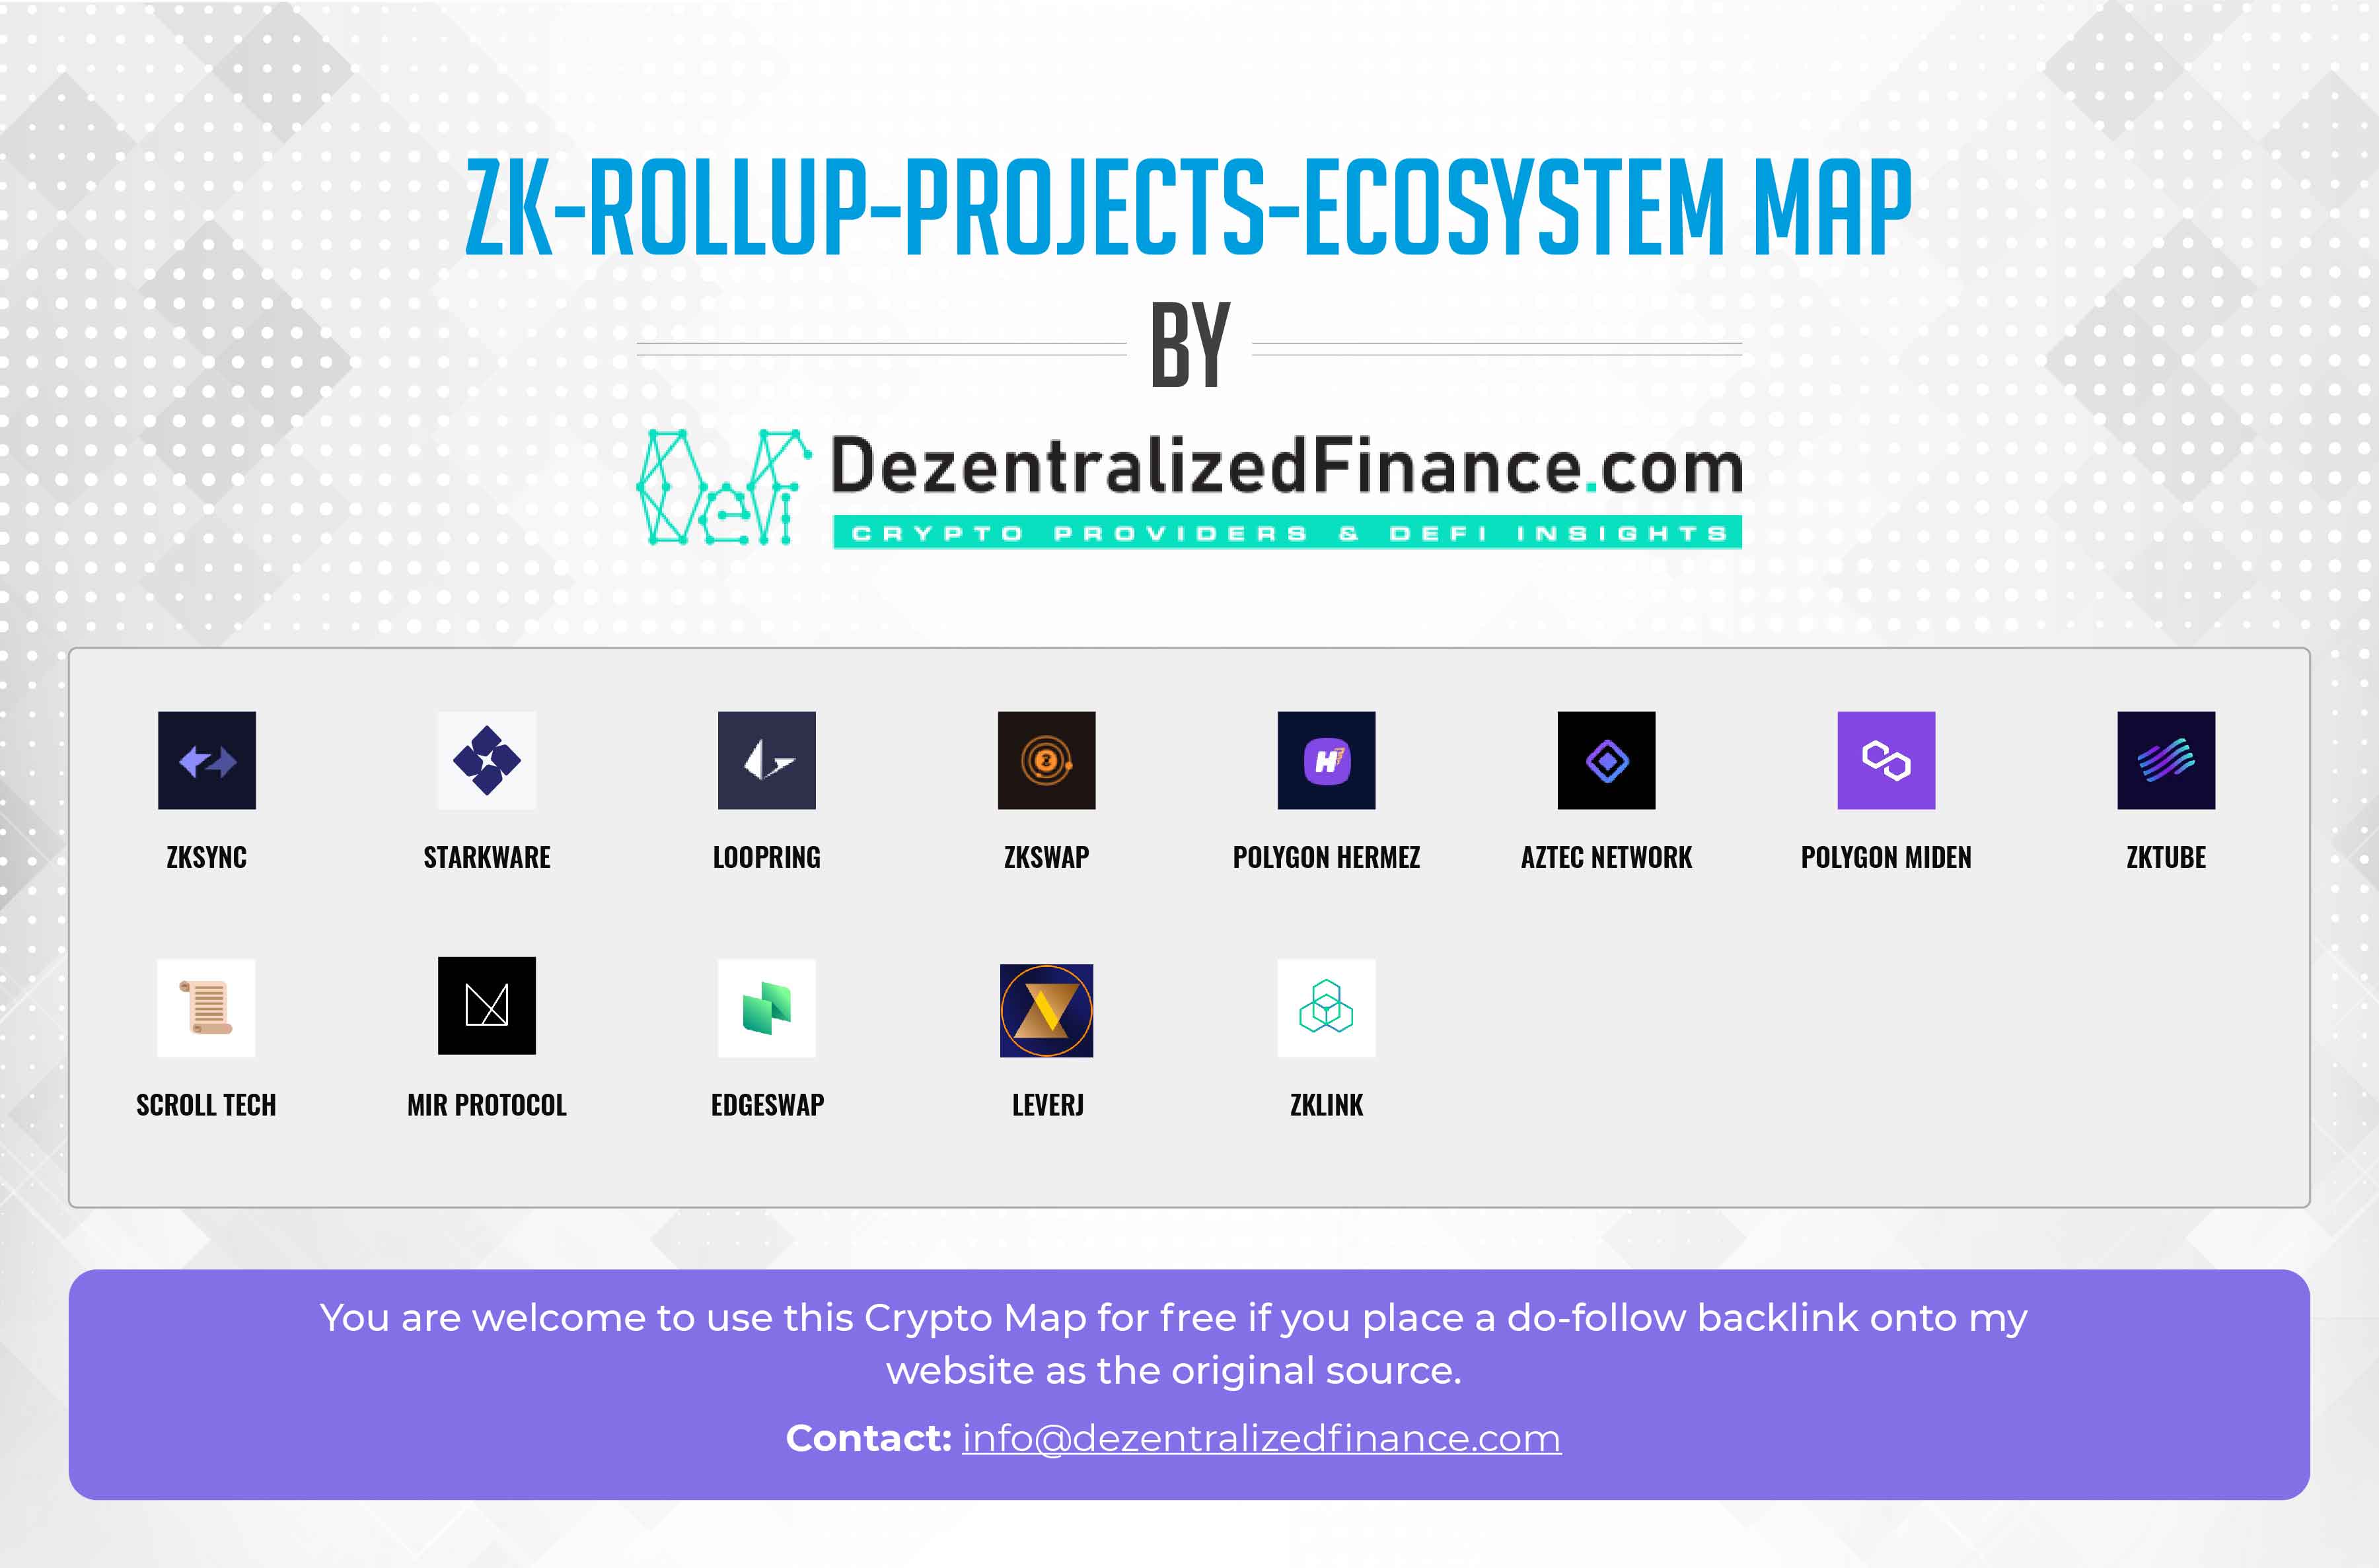 zk rollup projects ecosystem